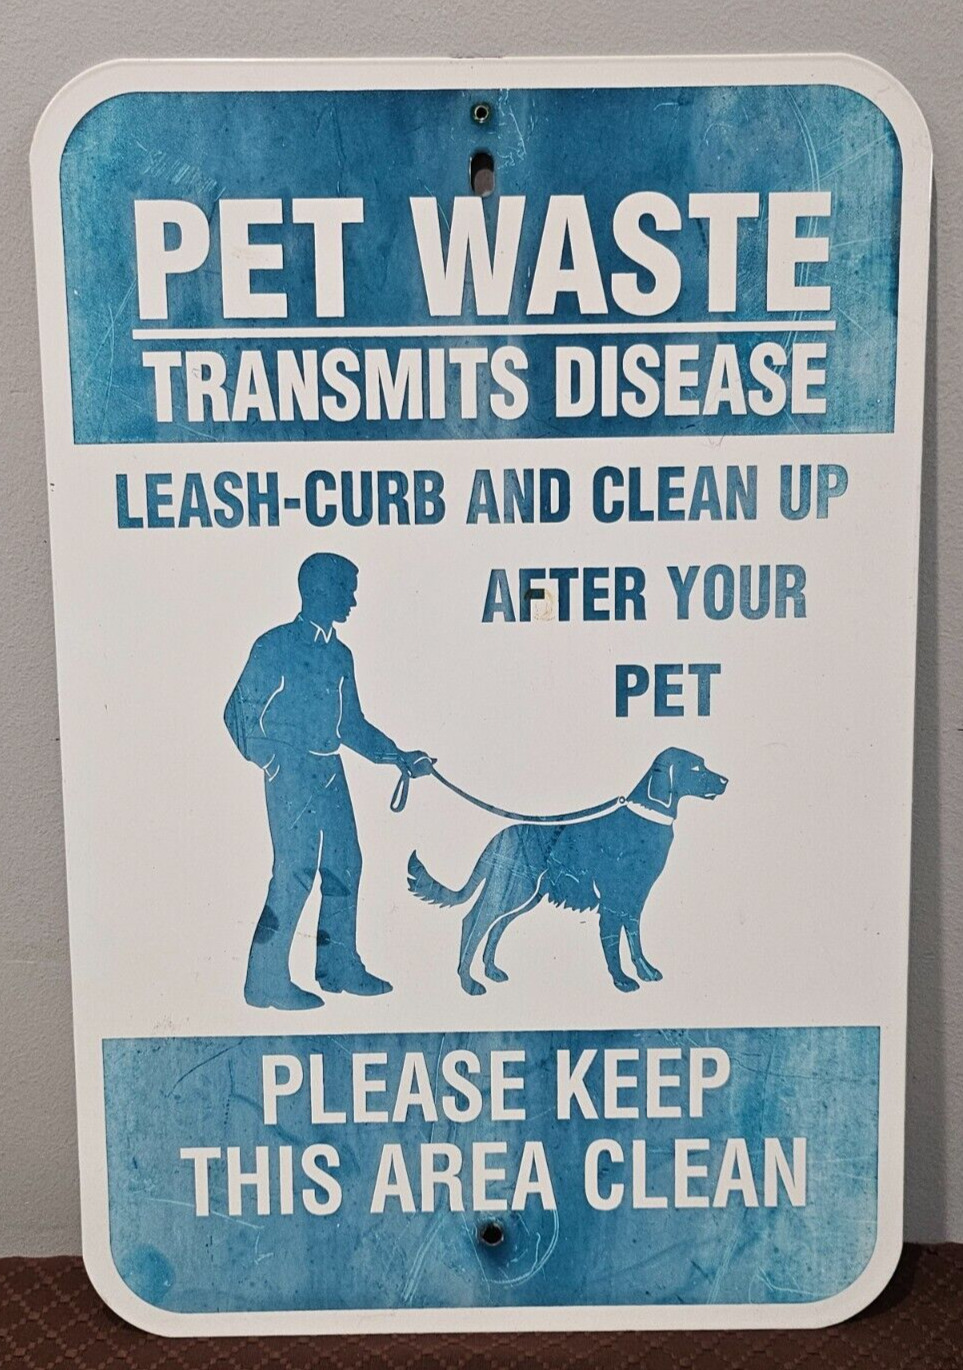 LEASH-CURB AND CLEAN UP AFTER YOUR PET VINTAGE USED STEEL METAL SIDEWALK AD SIGN